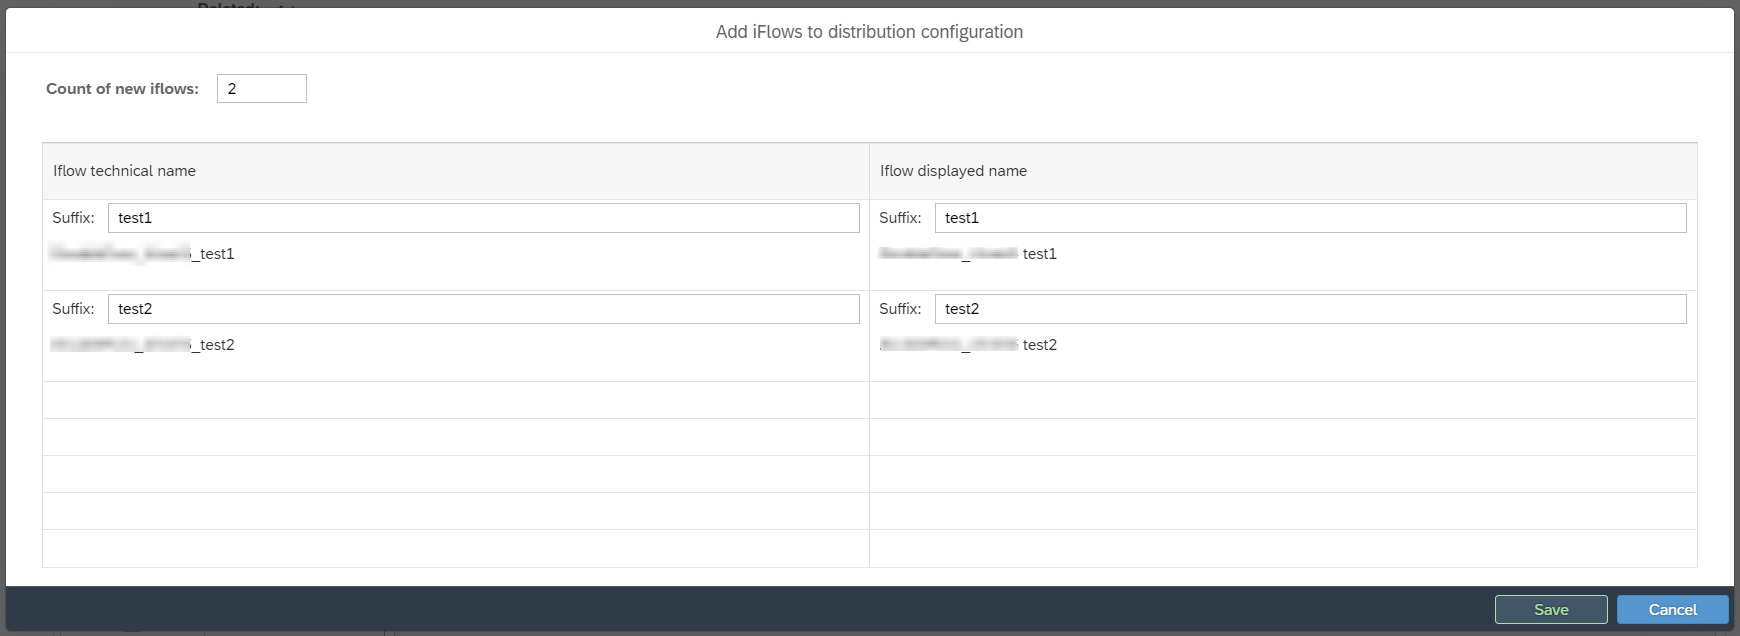 add iflows to distribution configuration